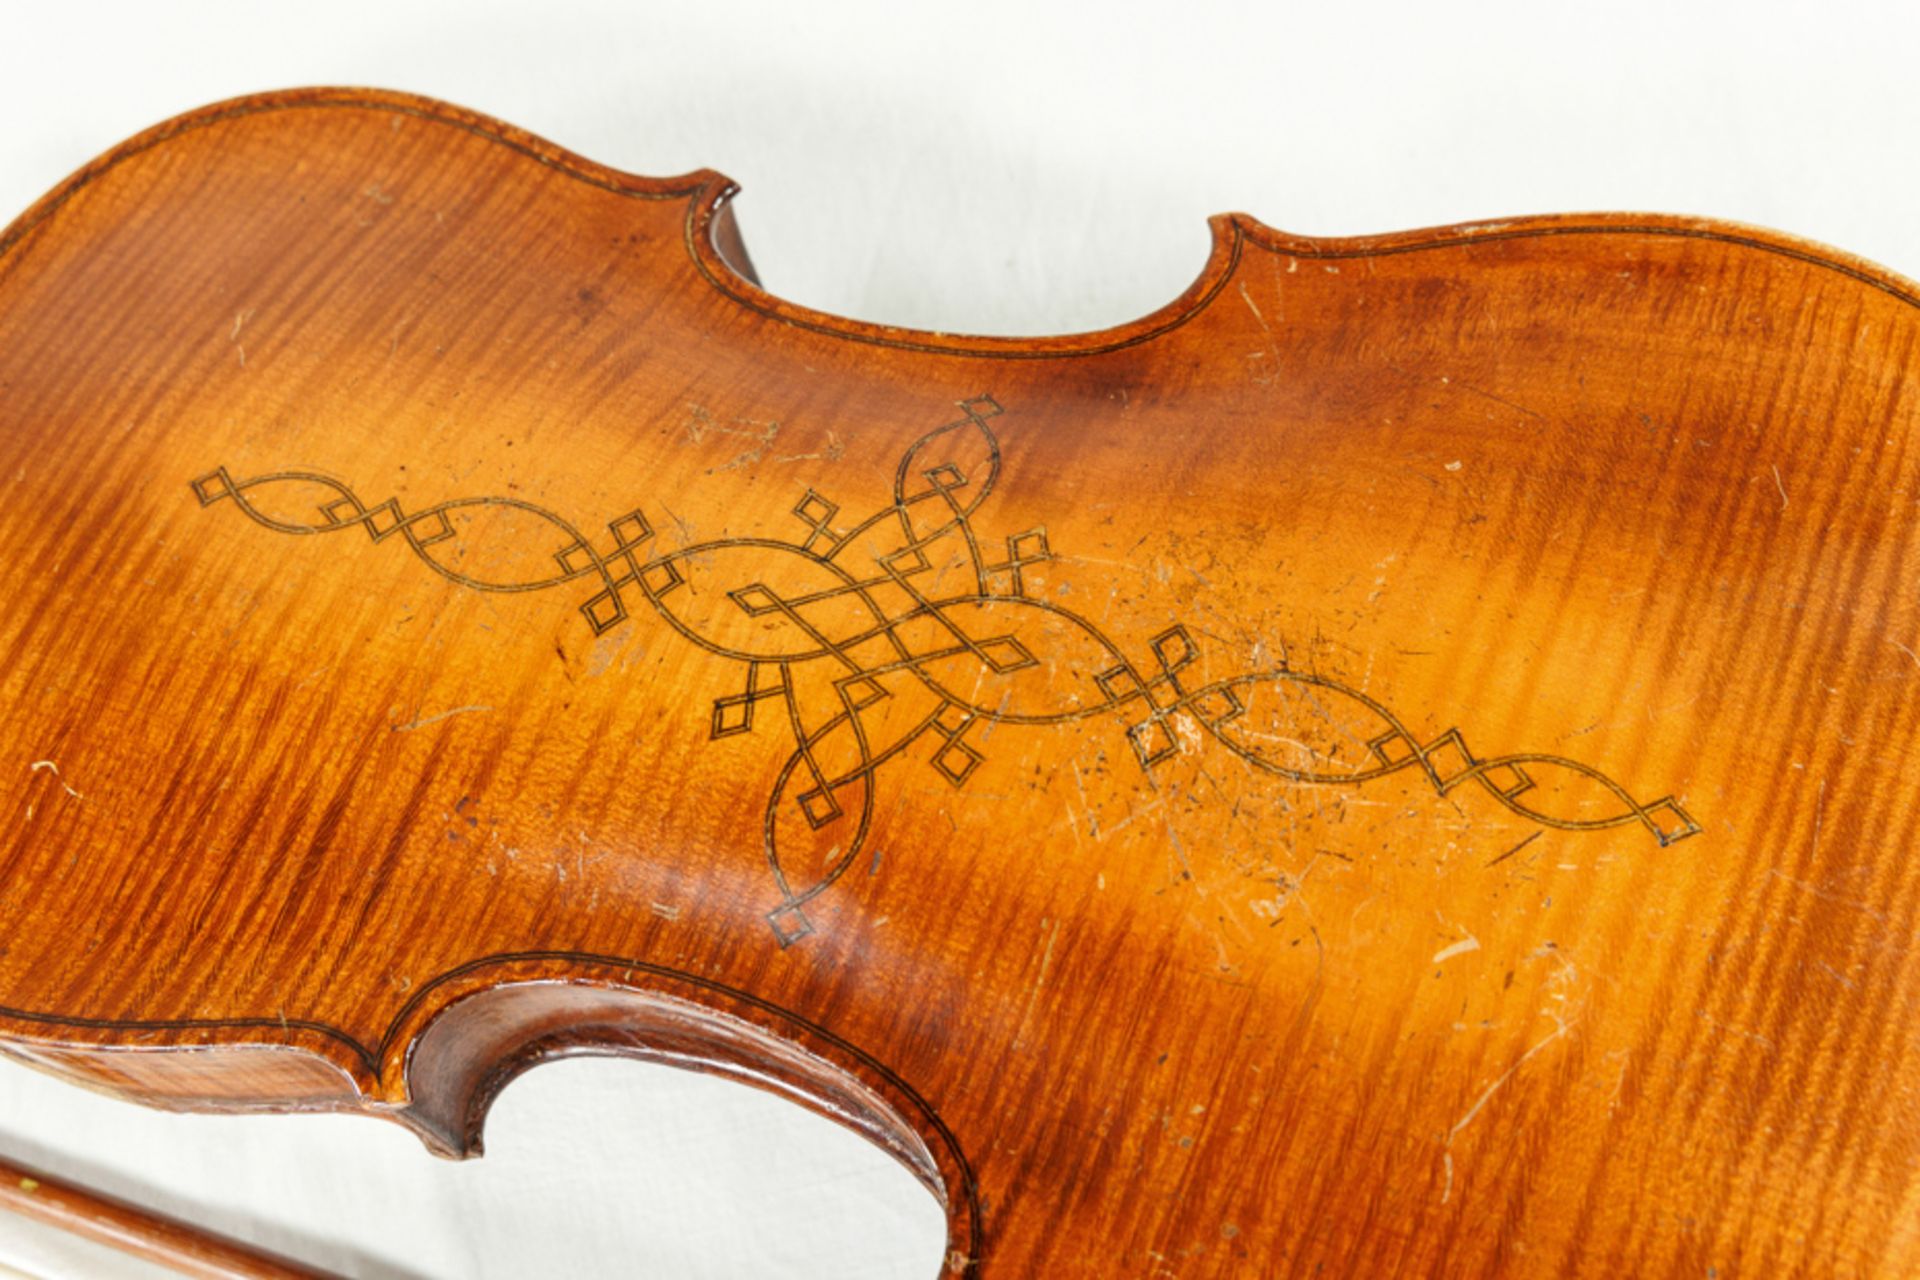 HISTORICAL ELEGANT VIOLIN WITH DECORATED BACK AND MATCHING CASE - Image 4 of 7